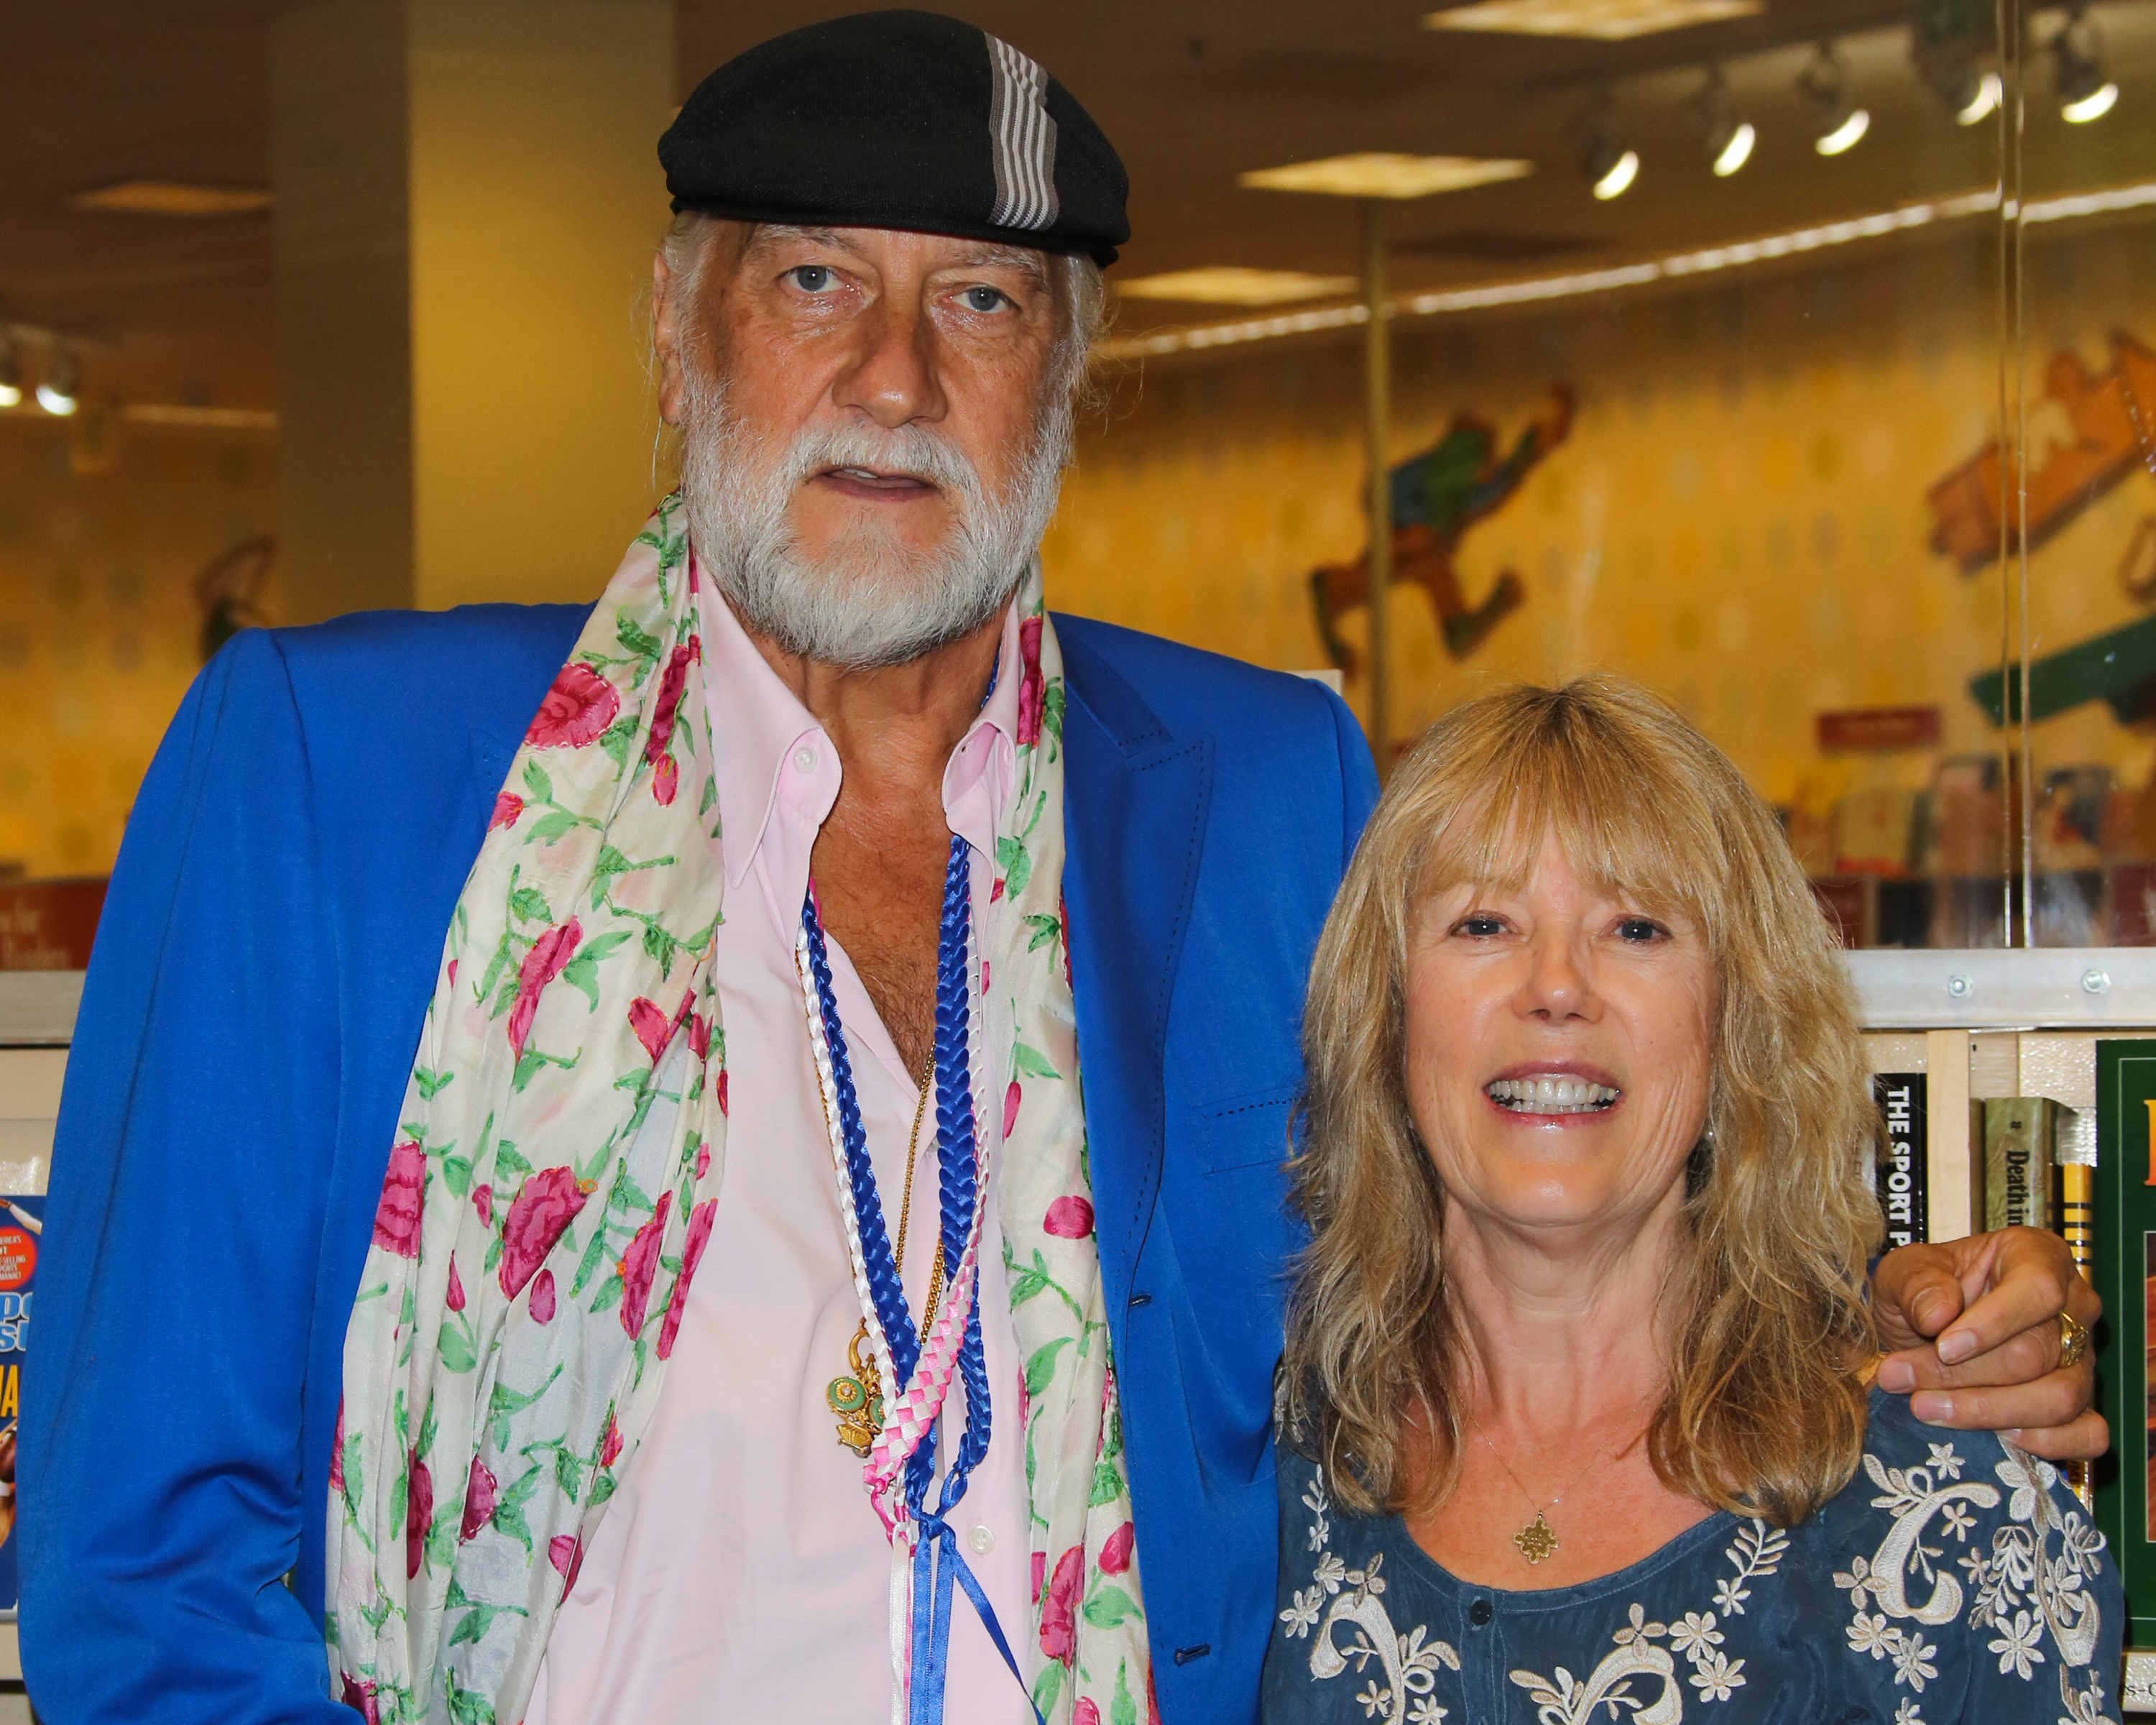 Mick Fleetwood and Jenny Boyd at Barnes & Noble bookstore at The Grove on April 26, 2014, in Los Angeles, California. | Source: Getty Images